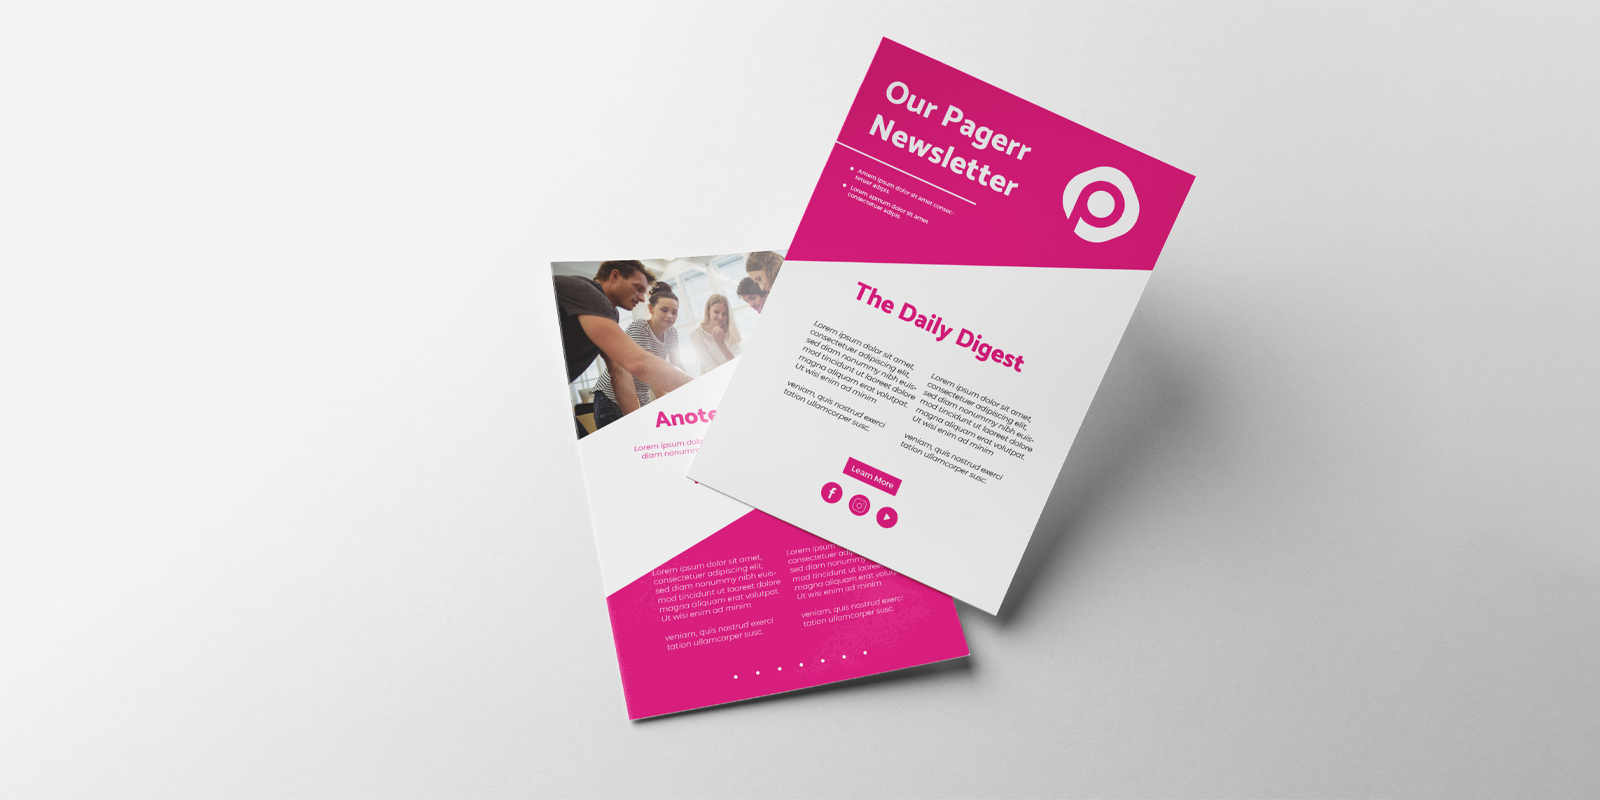 Newsletters in Perth - Print with Pagerr